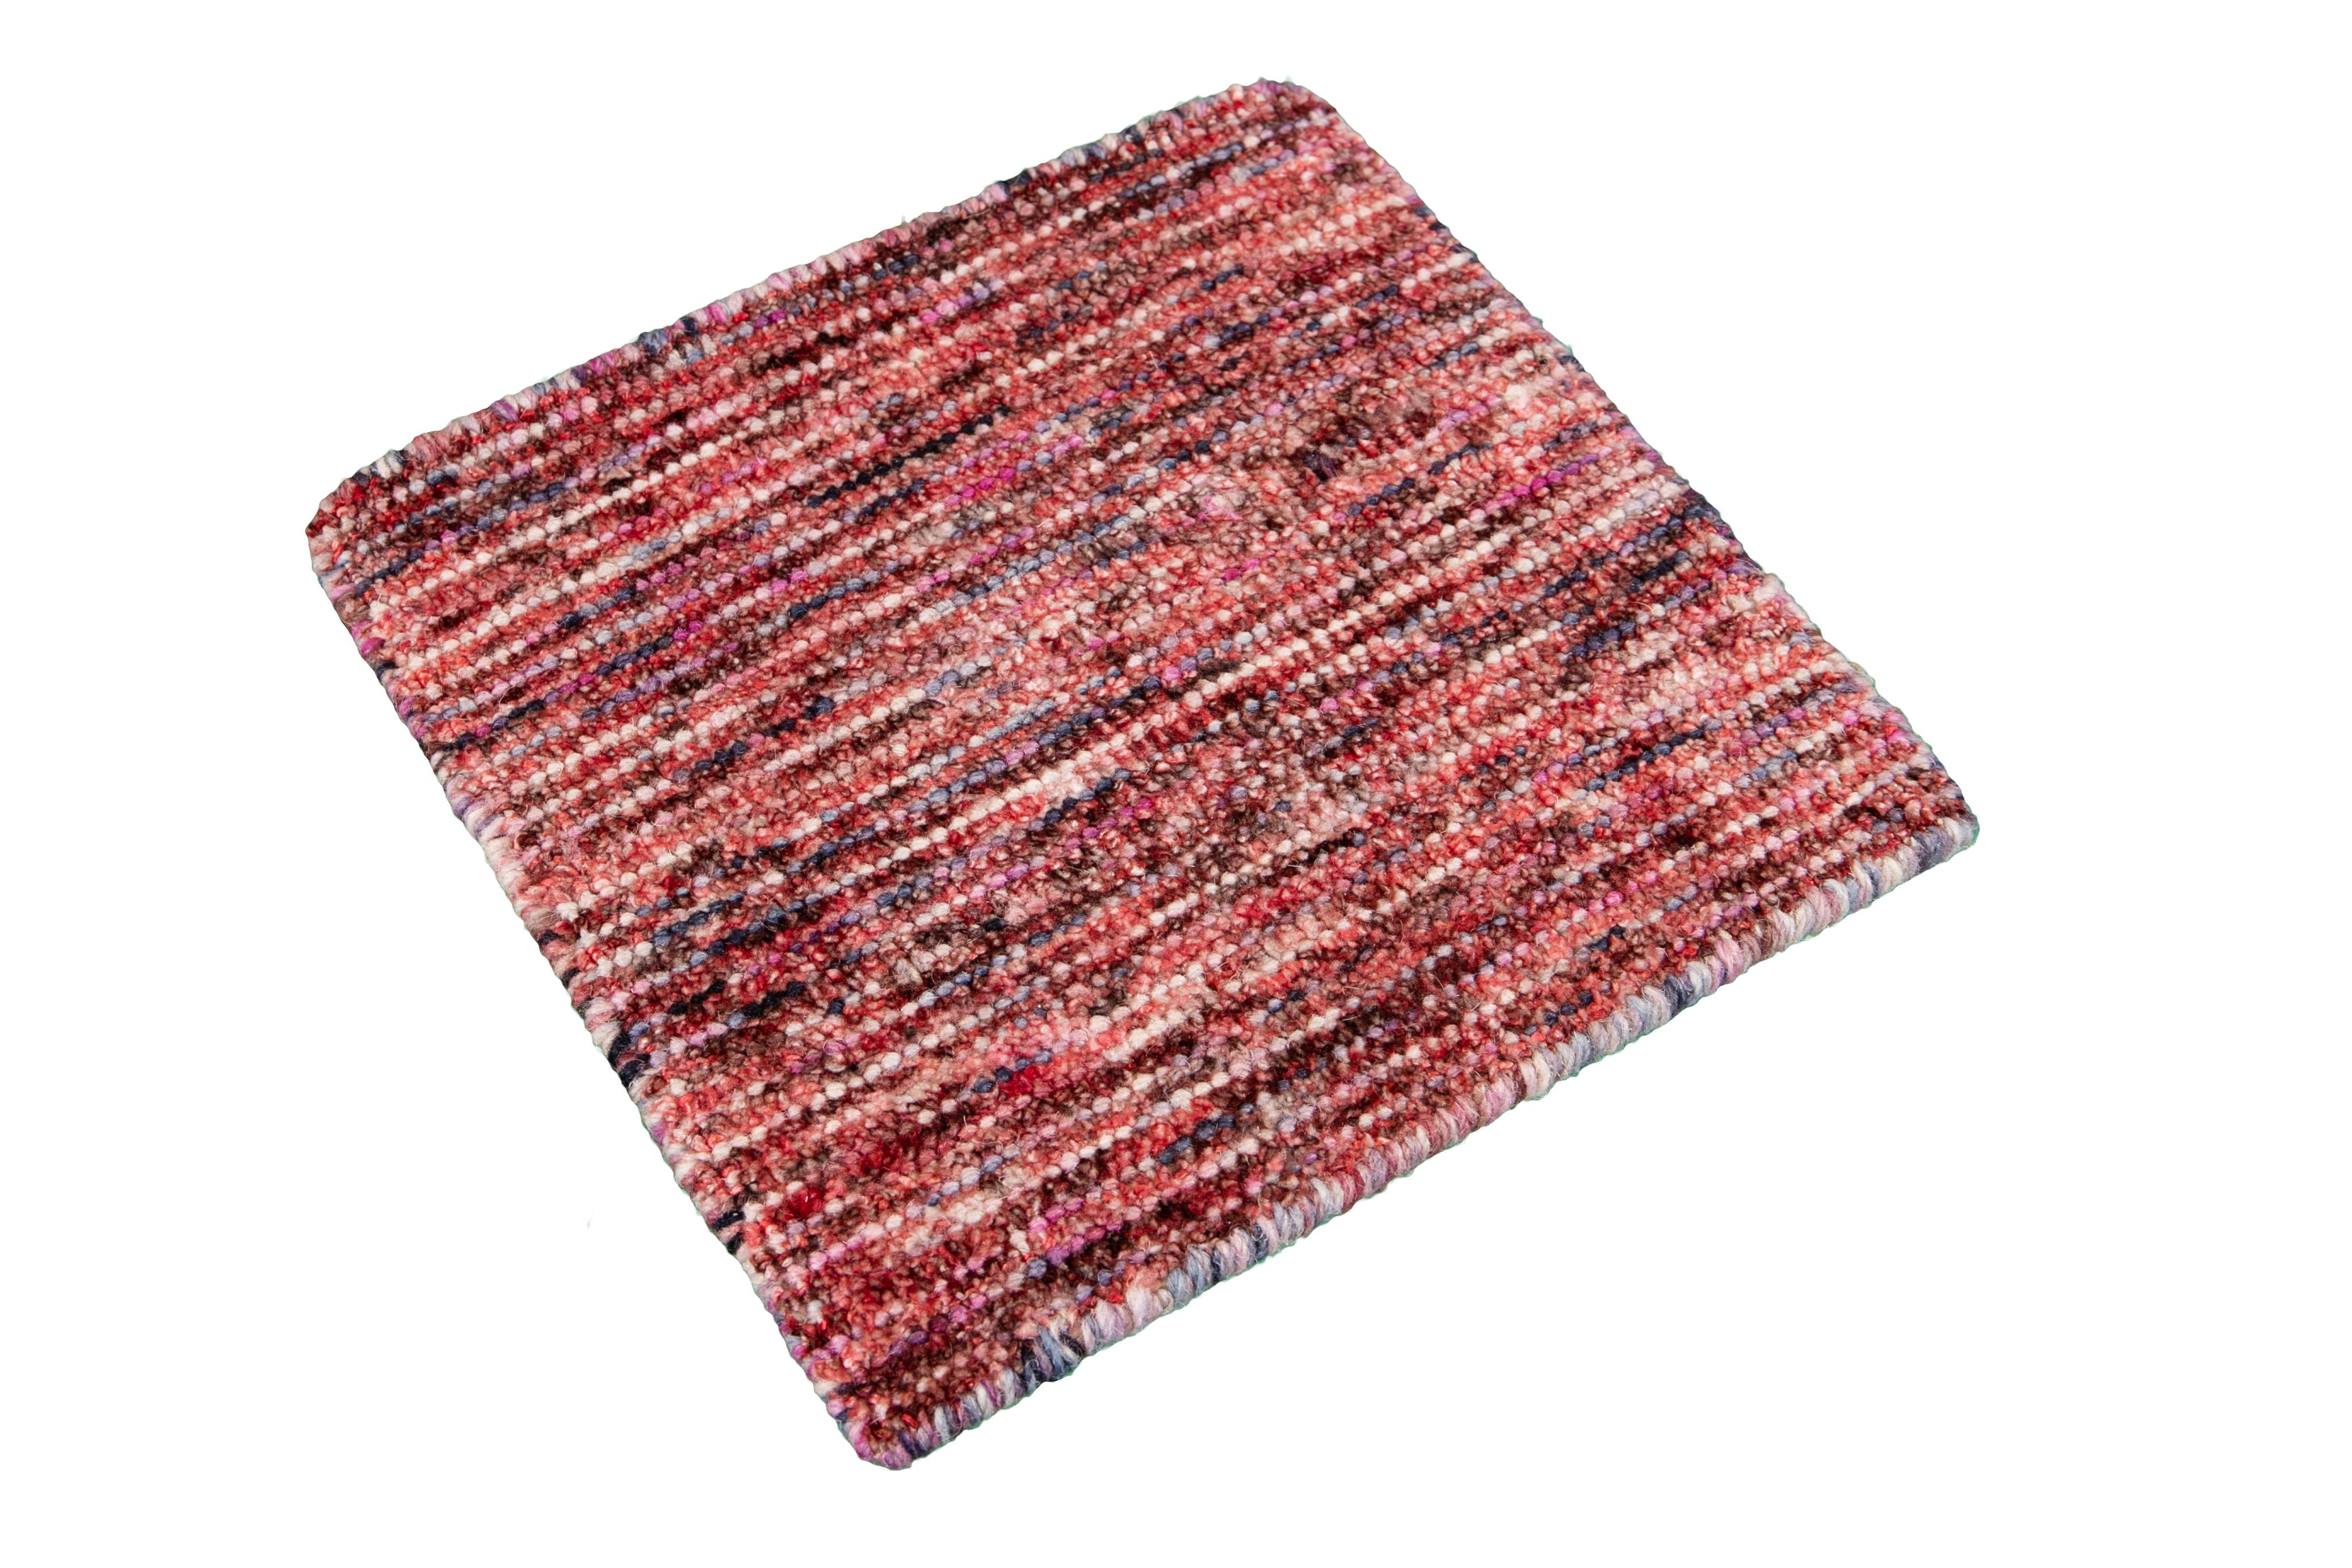 Wool and silk Boho custom rug. Custom sizes and colors made-to-order.

Material: Wool/Bamboo silk
Lead Time: Approx. 15-20 weeks
Available colors: 100+ shades
Made in India
(Price shown is for an 8' x 10' rug.)